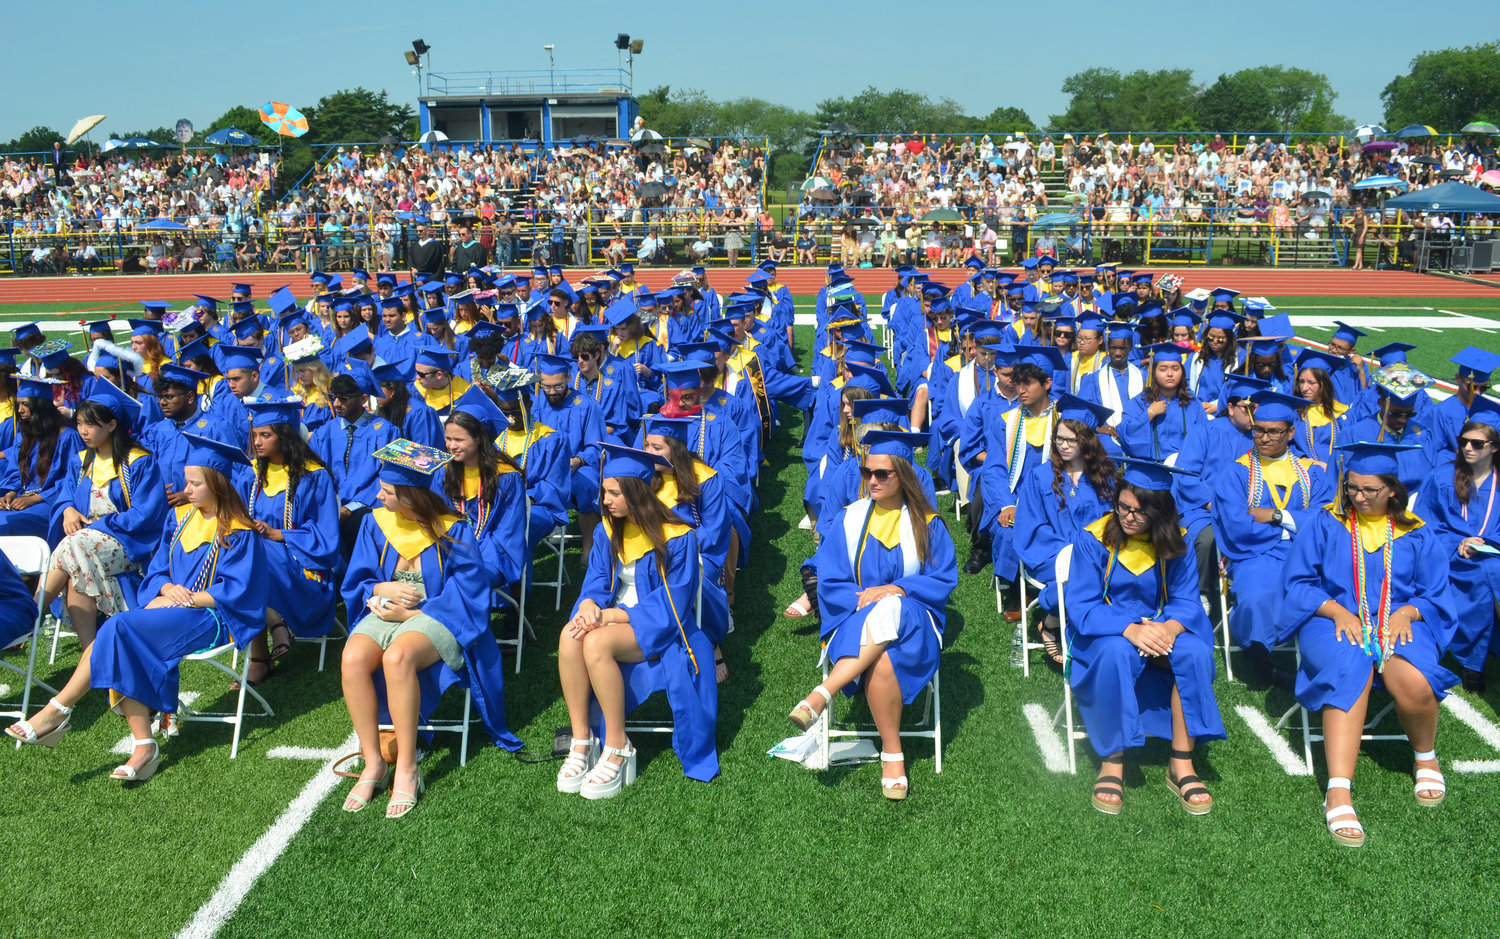 East Meadow High School graduates donned their blue and gold for their ceremony on June 26.